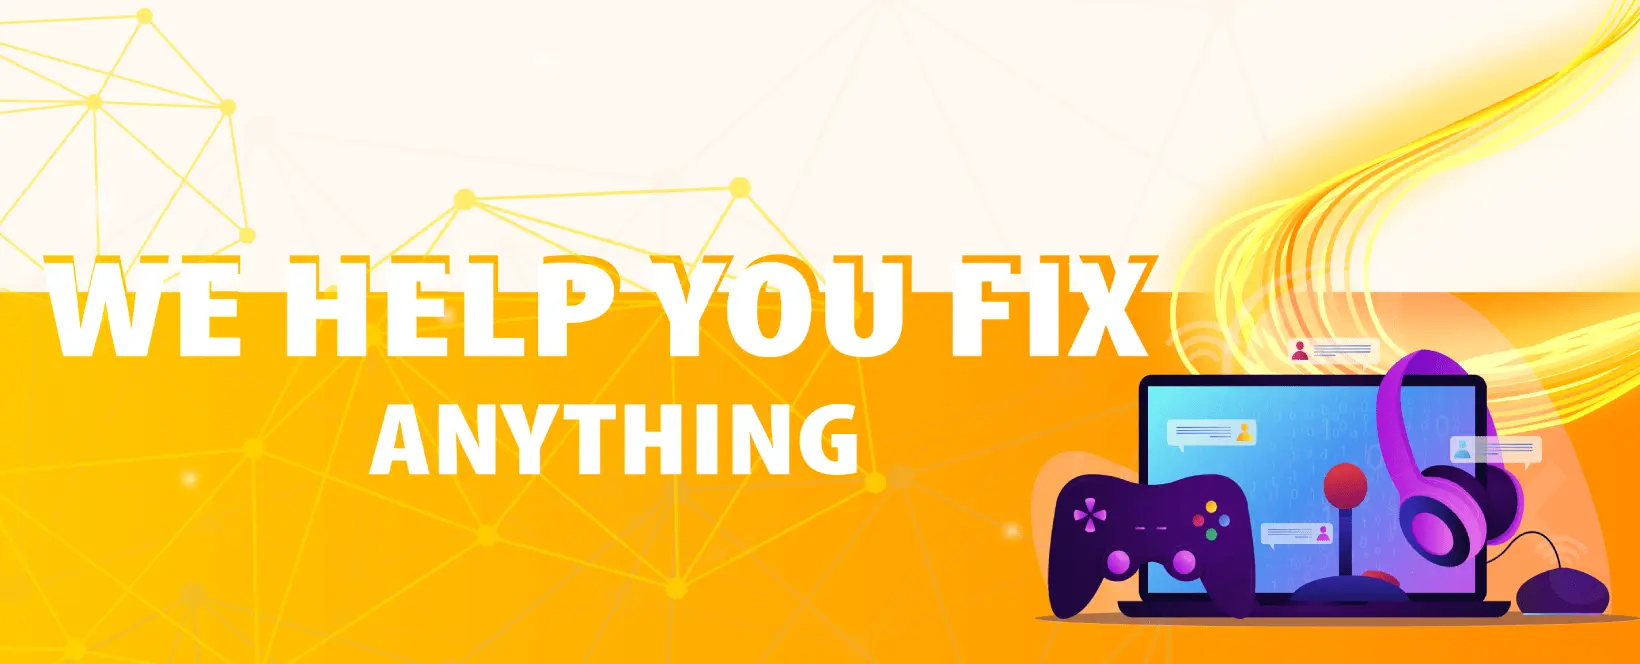 We help you fix any gaming-related problem!